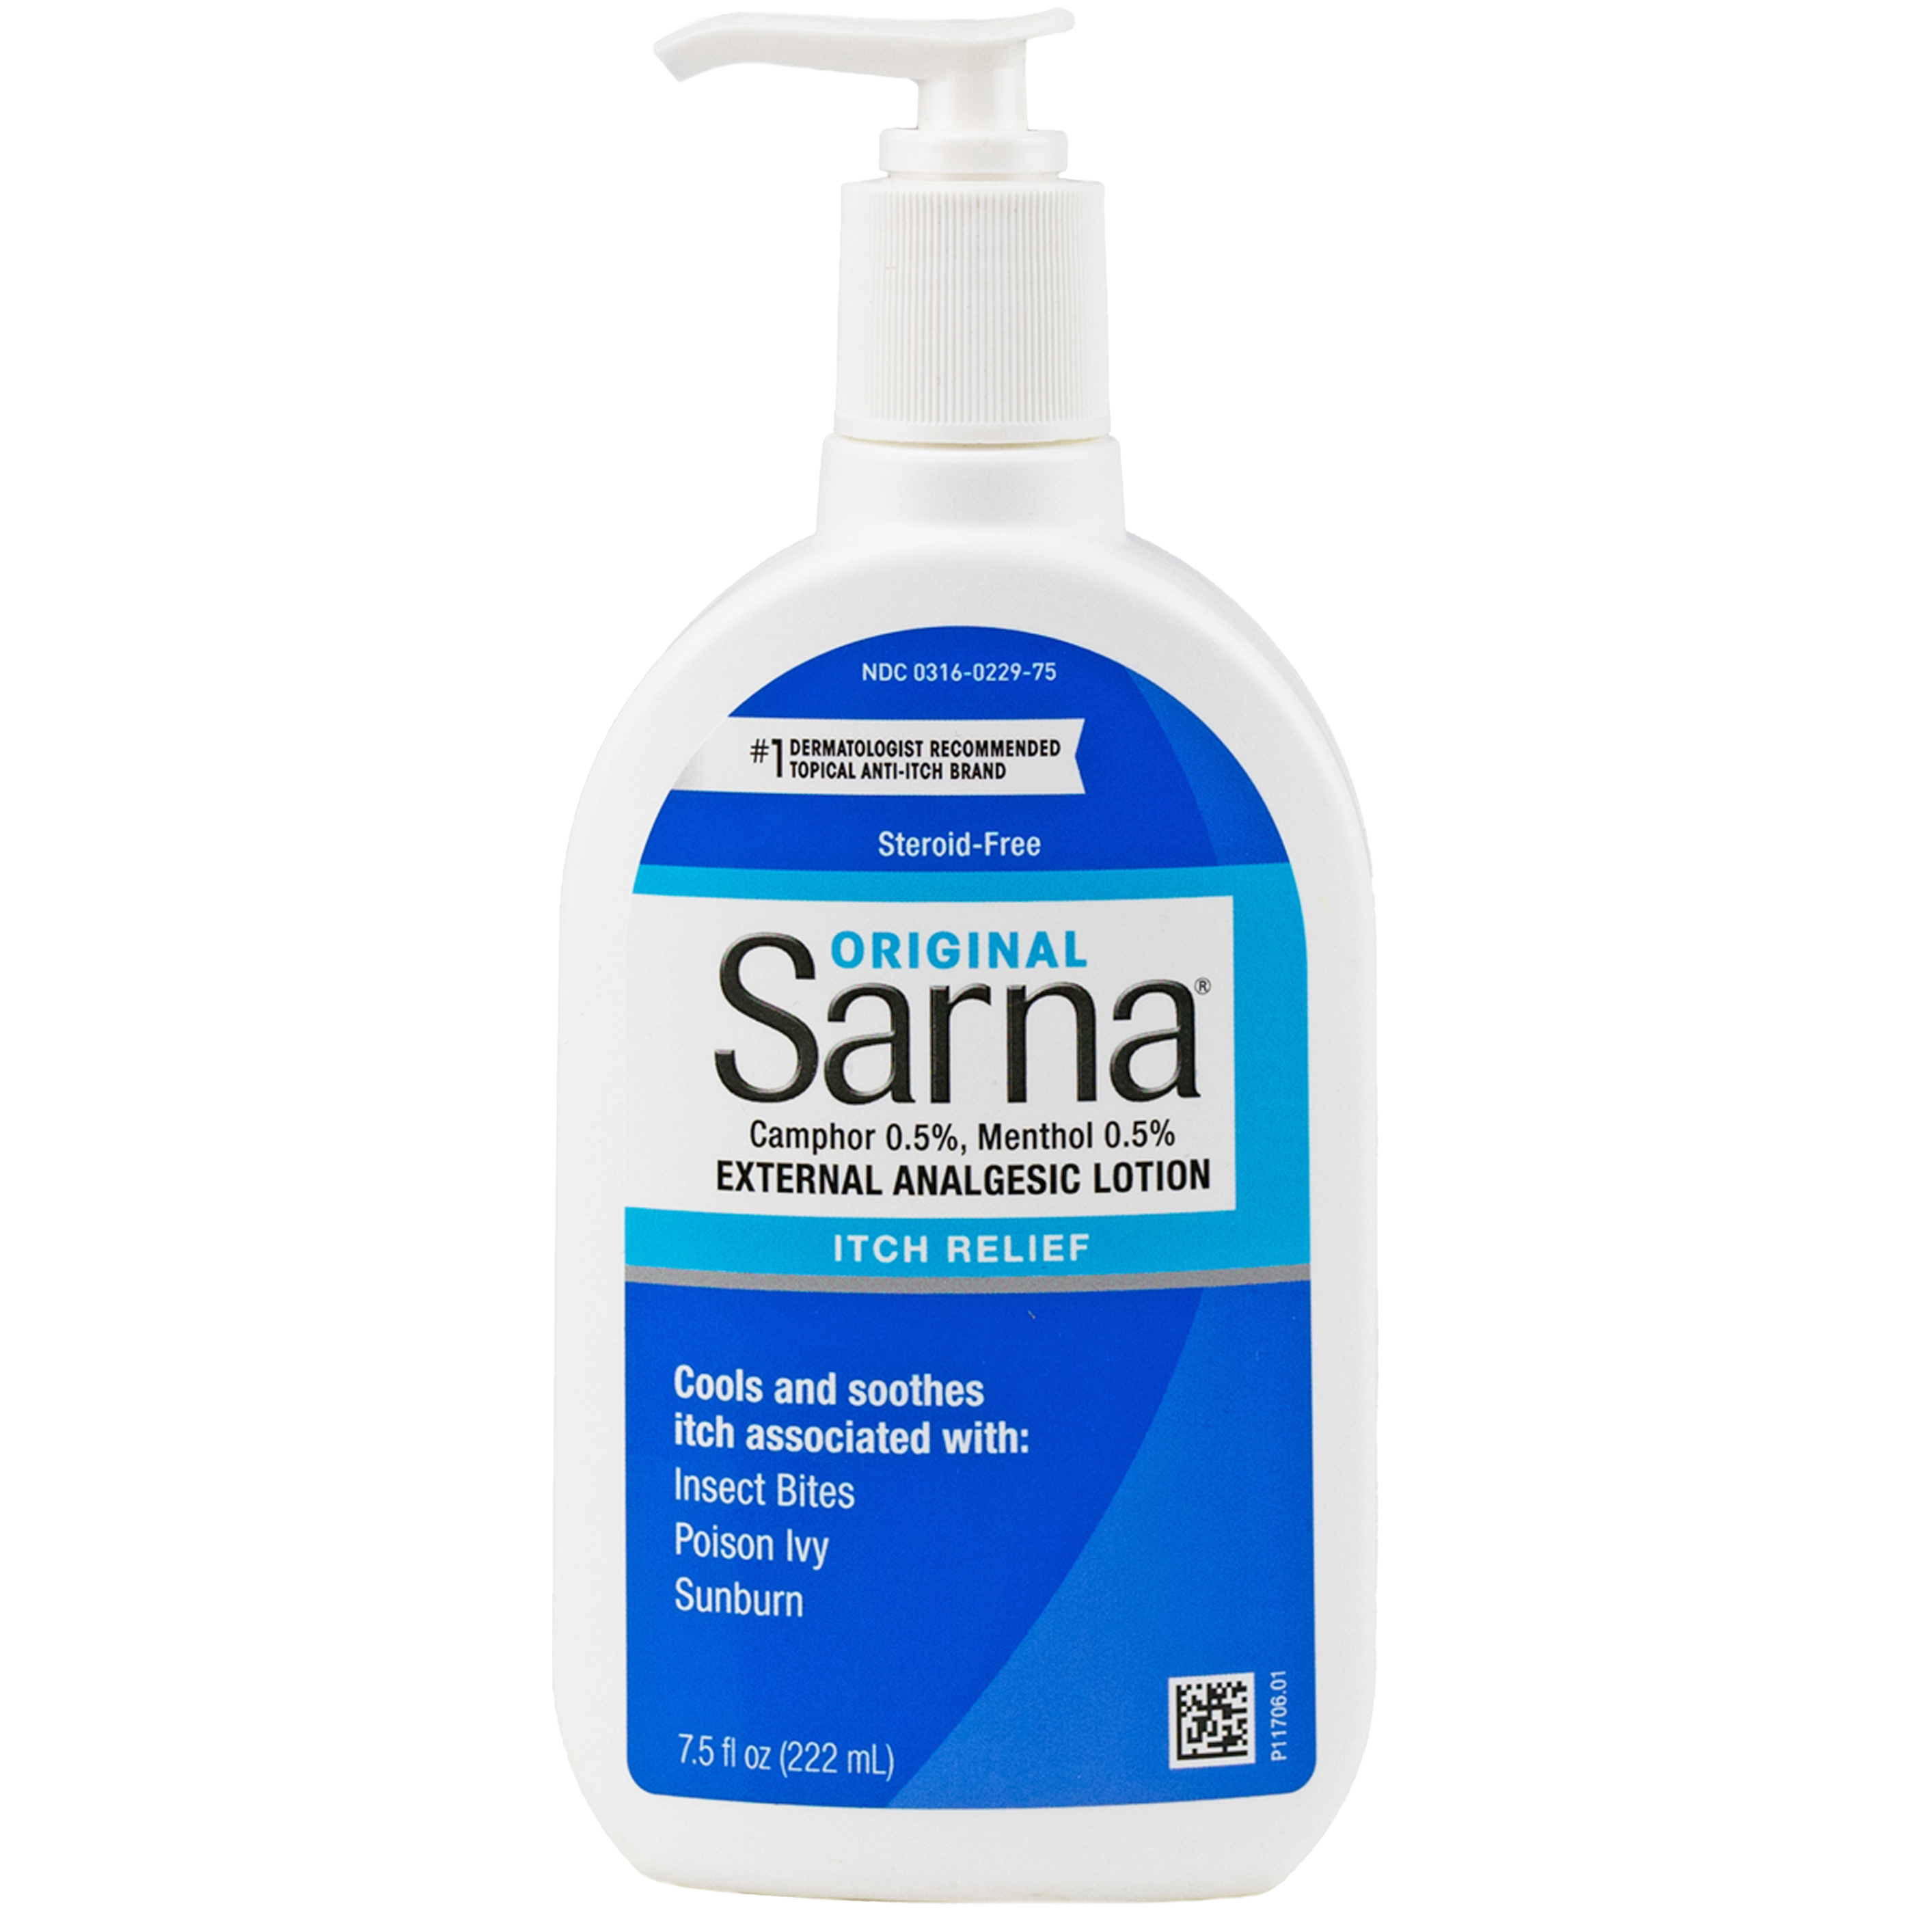 Sarna Original Steroid-Free Anti-Itch Cooling and Soothing Lotion, 7.5 oz - image 1 of 9